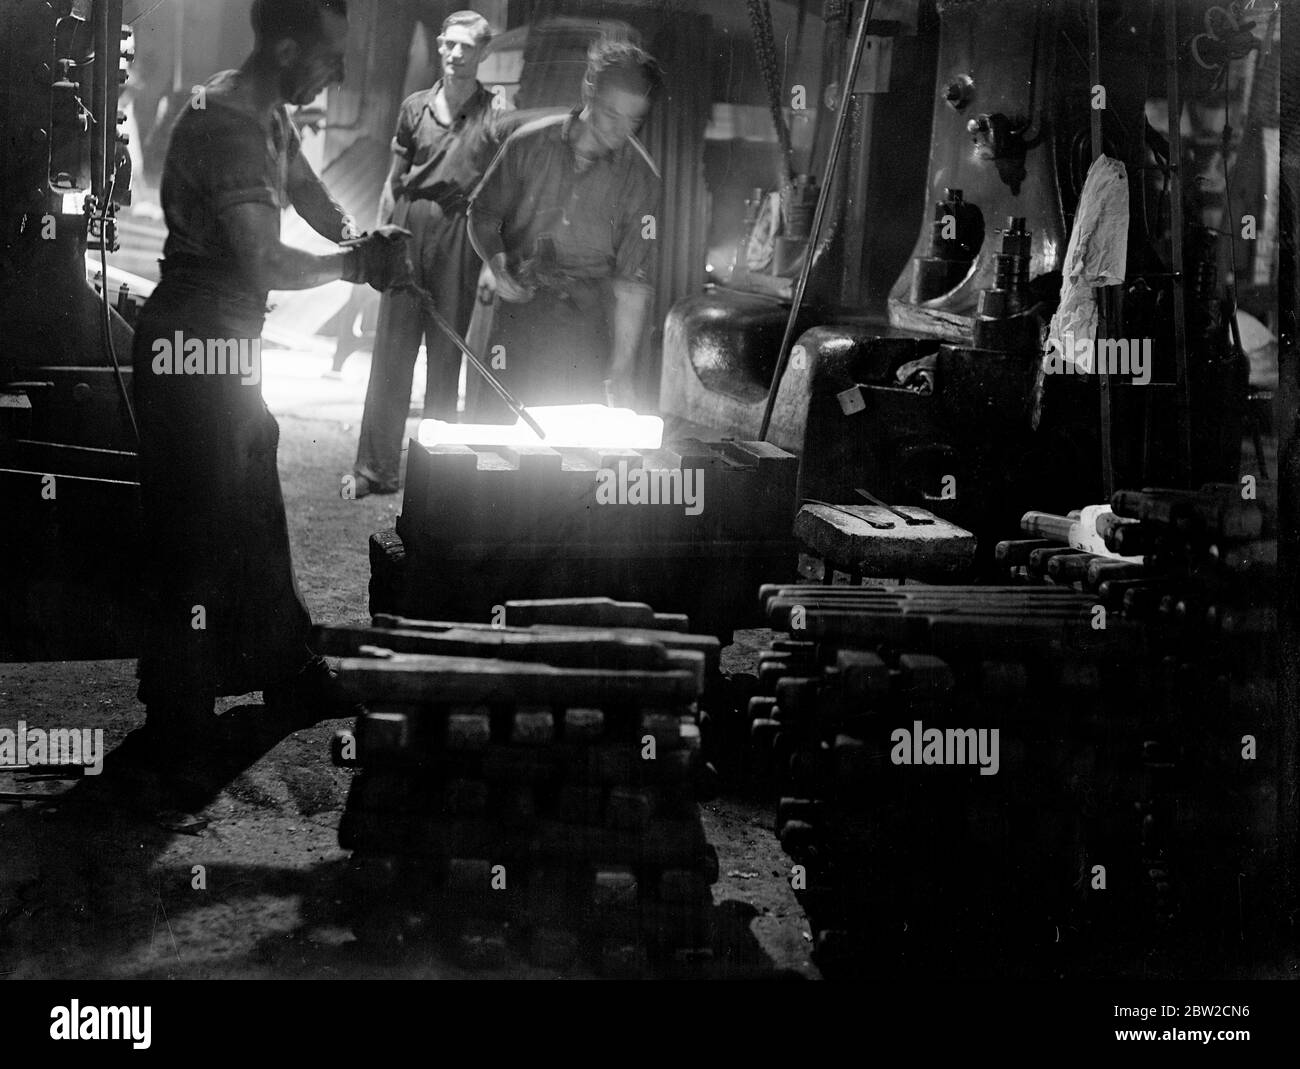 Turning out small arms by the thousand in a British factory. These pictures were made in a Royal Ordinance factory of the Ministry of Supply specialising in the production of small arms. Here, thousands of weapons such as machine guns, rifles and revolvers are being turned out at a high speed for the use of Britain's rapidly growing force. Photo shows forging a Bren gun. 15 November 1939 Stock Photo